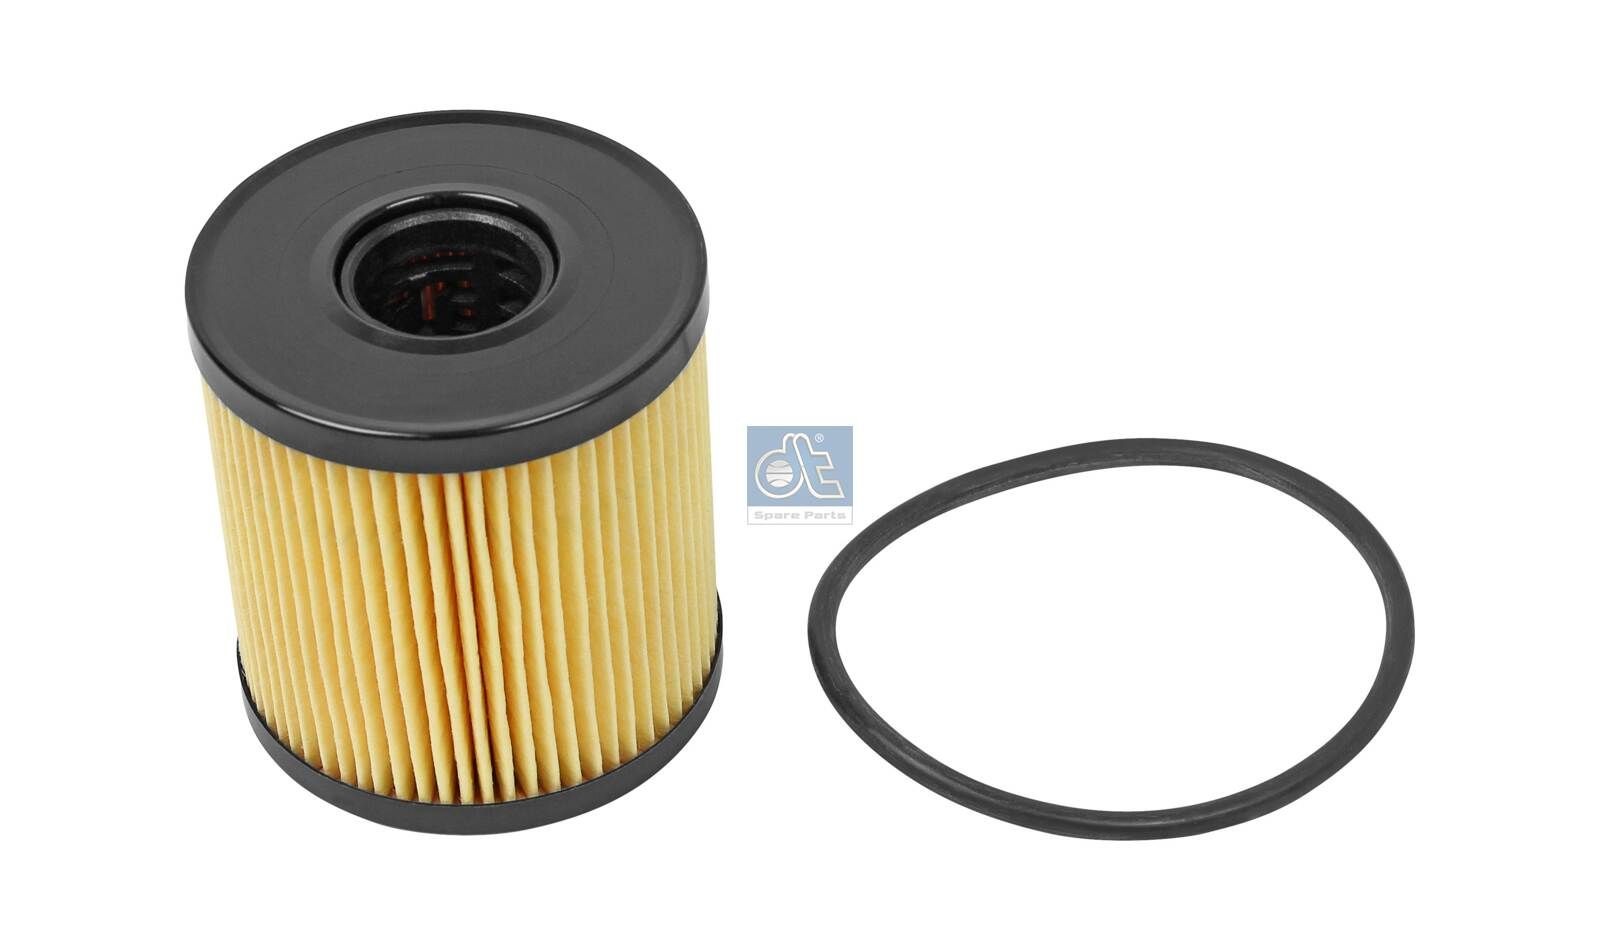 Original DT Spare Parts 1 457 429 249 Oil filters 12.16025 for FORD MONDEO